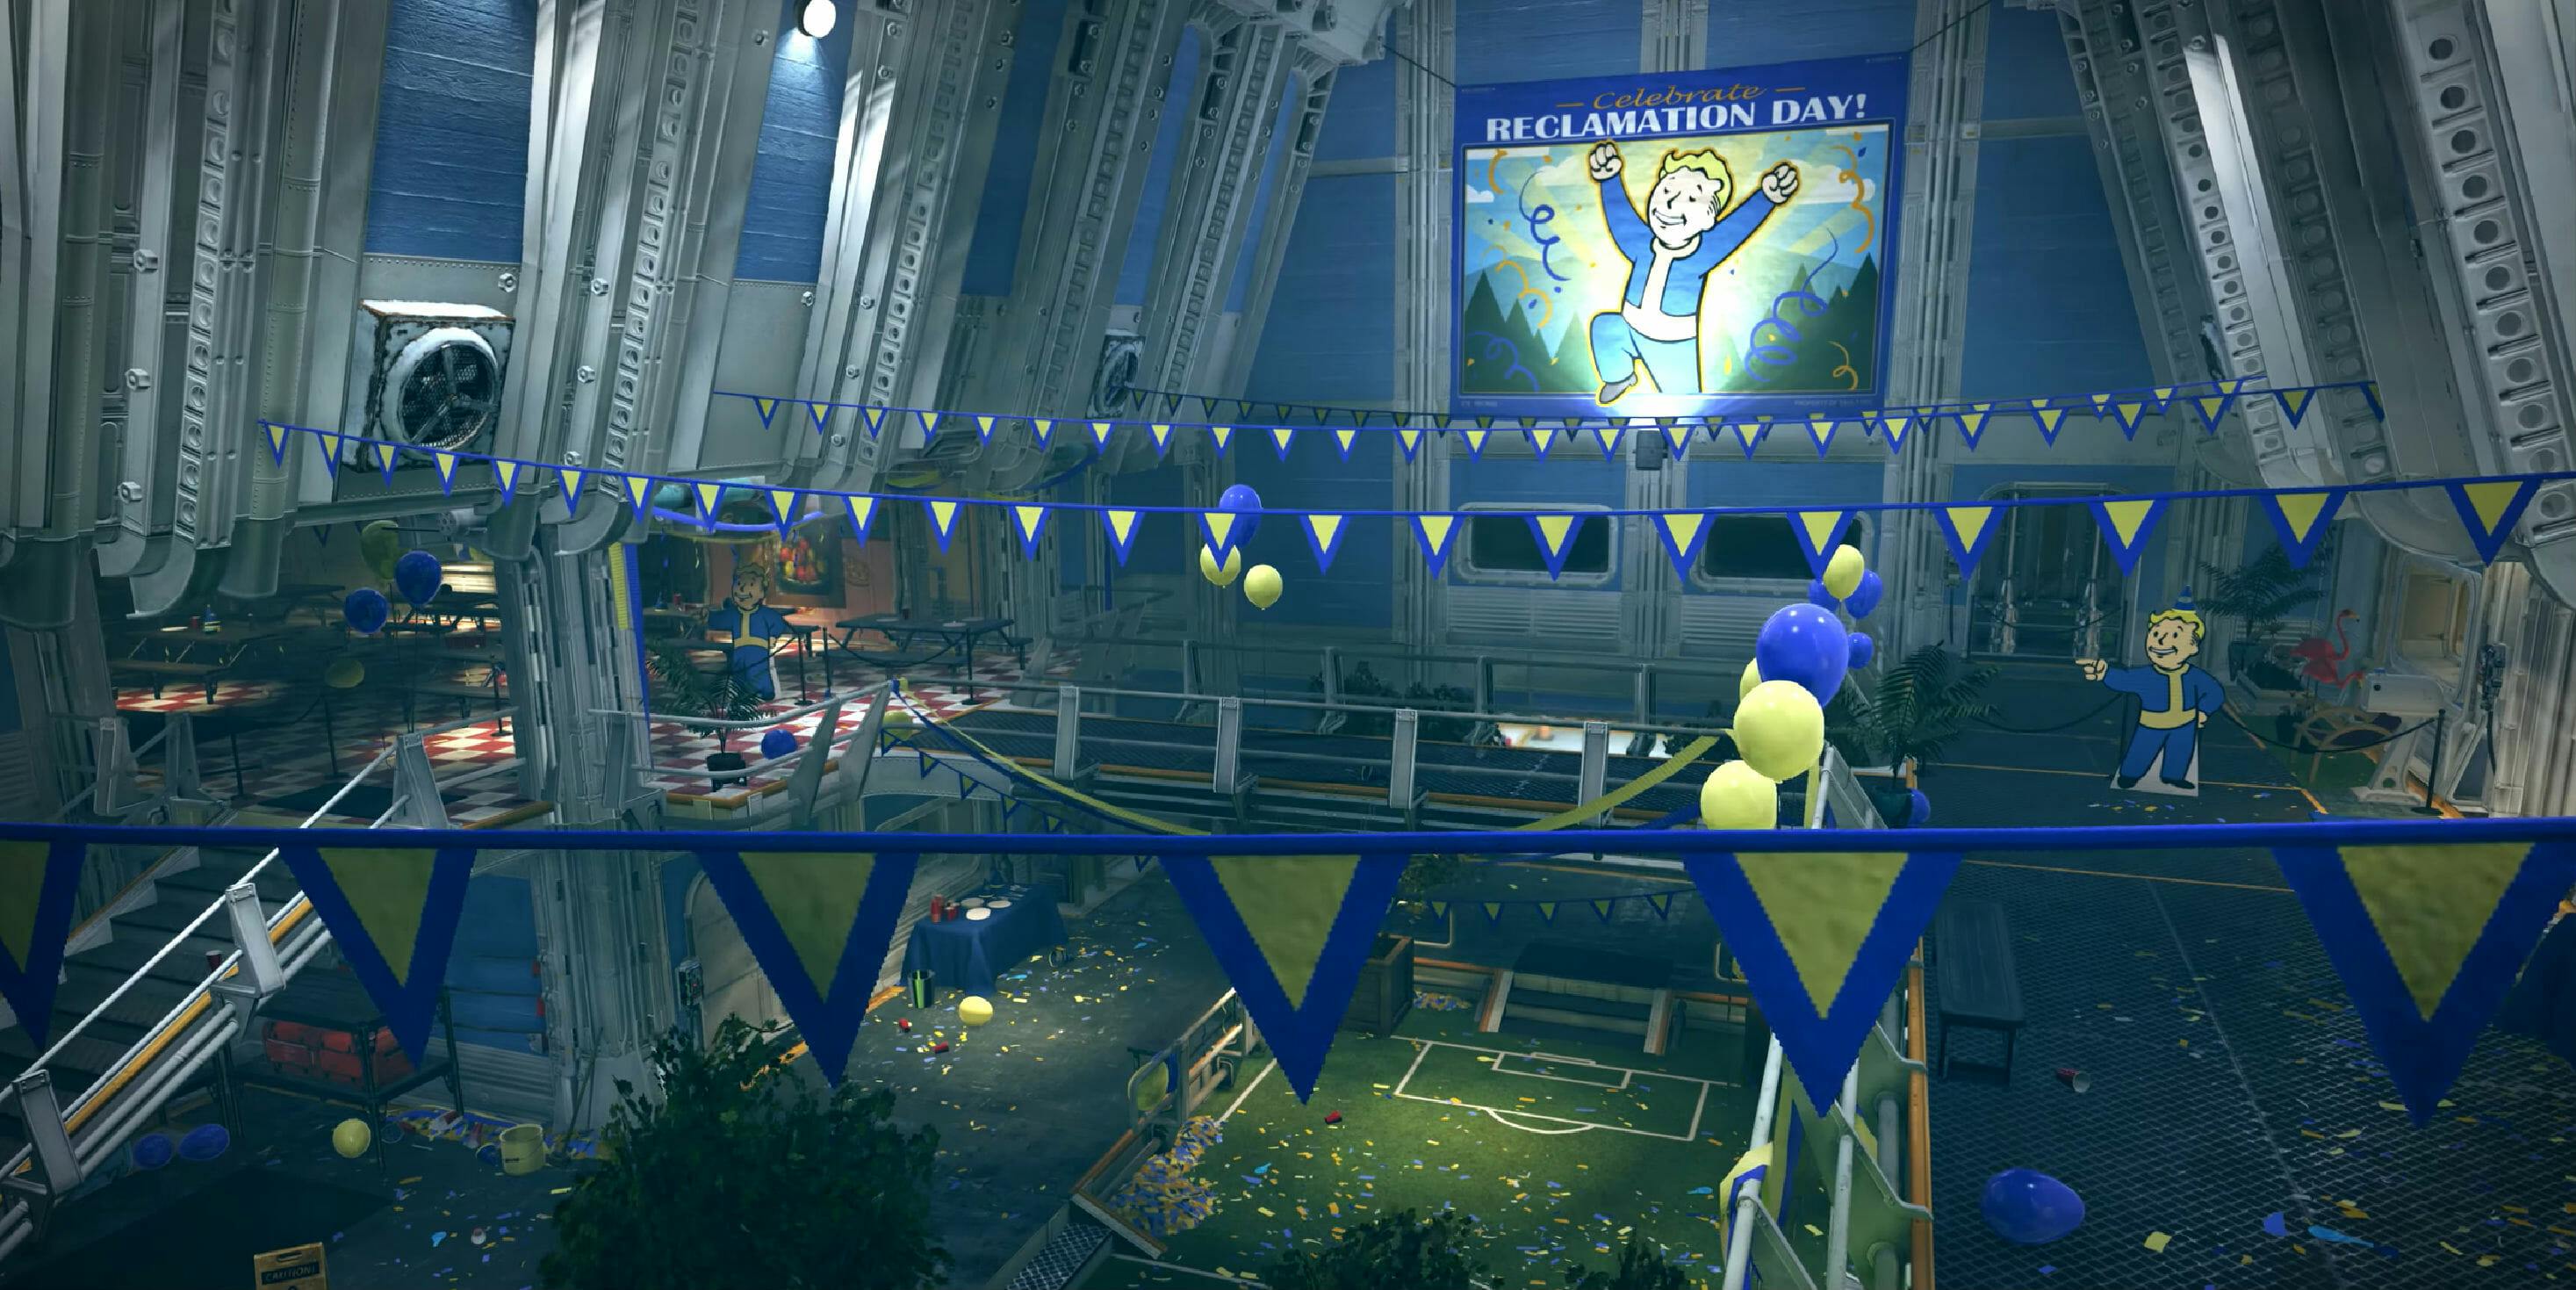 Fallout 76 : Inside Vault 76 on Reclamation Day